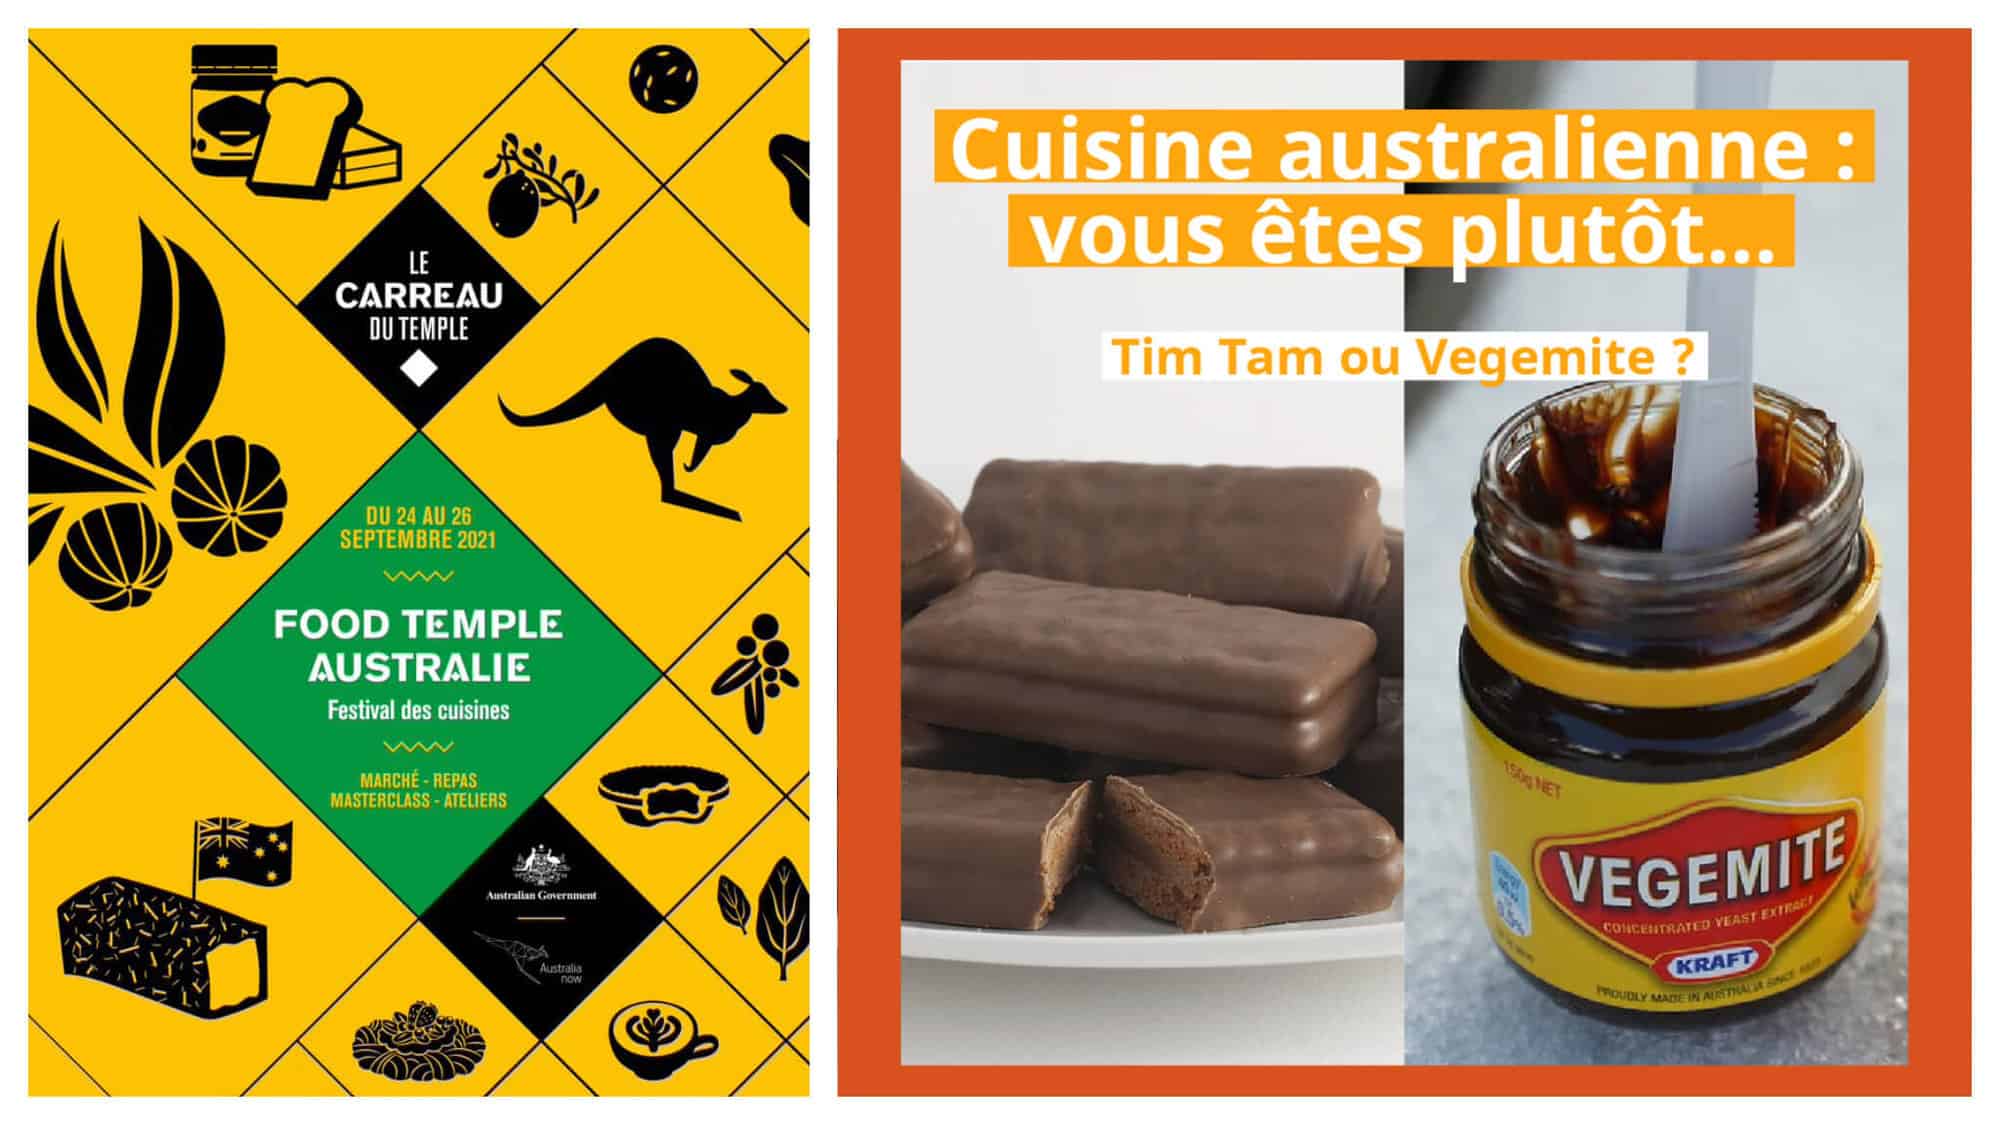 Left: promotional image for Food Temple Australie. Right: Tim tams and Vegemite with text overylayed in French: 'Cuisine australienne: Vous etes pluton Tim tam ou Vegemite?' 